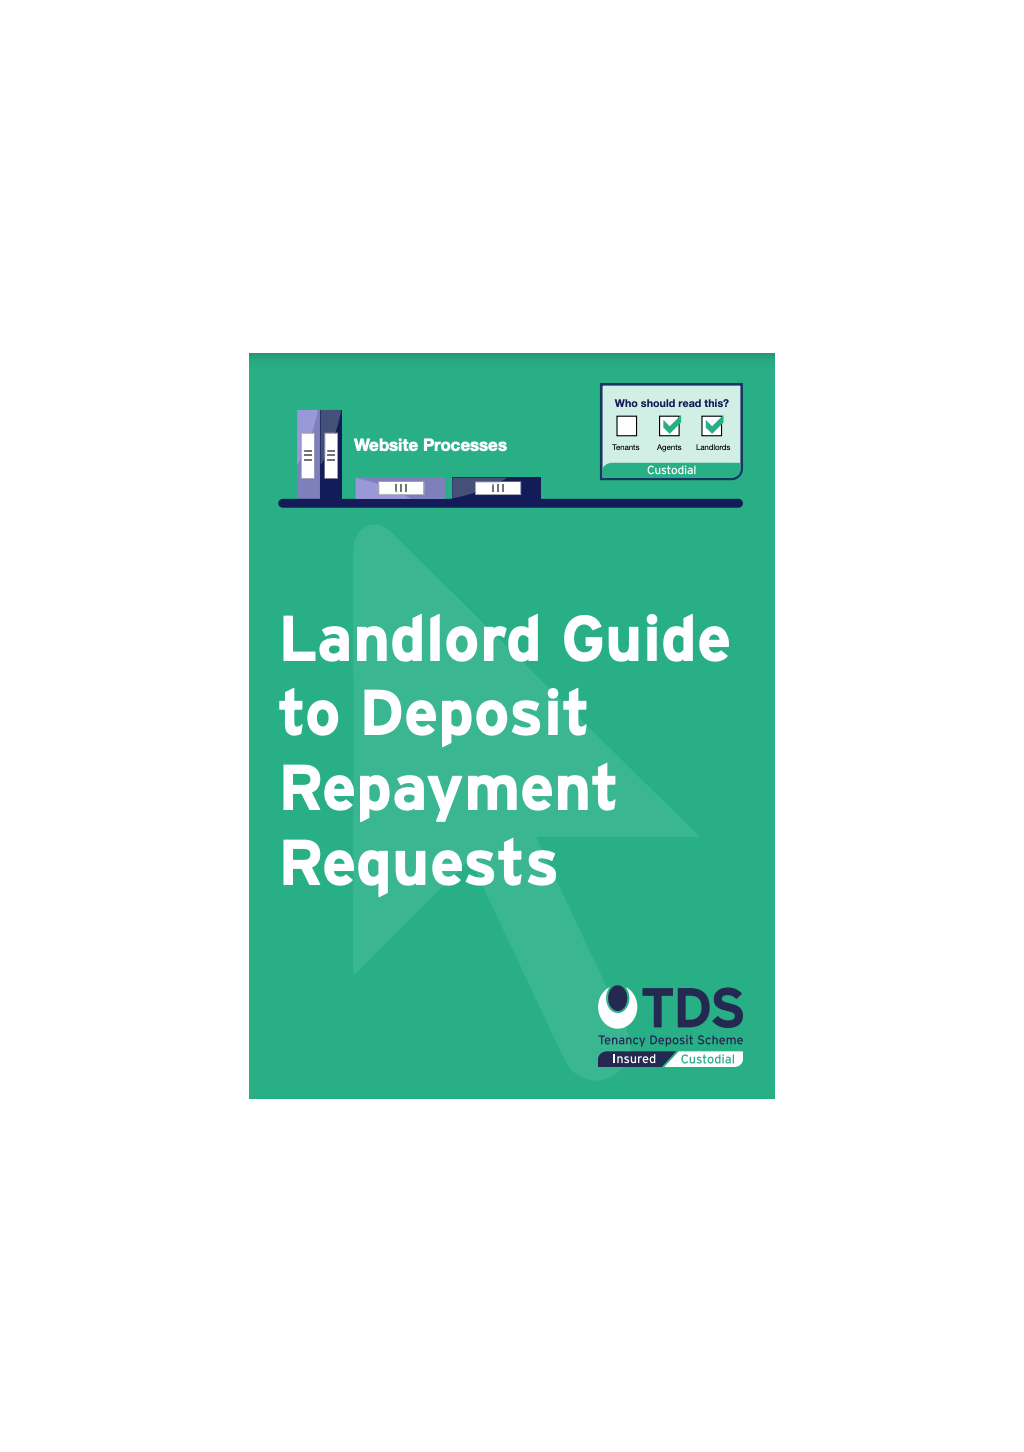 Landlord Guide to Deposit Repayment Requests